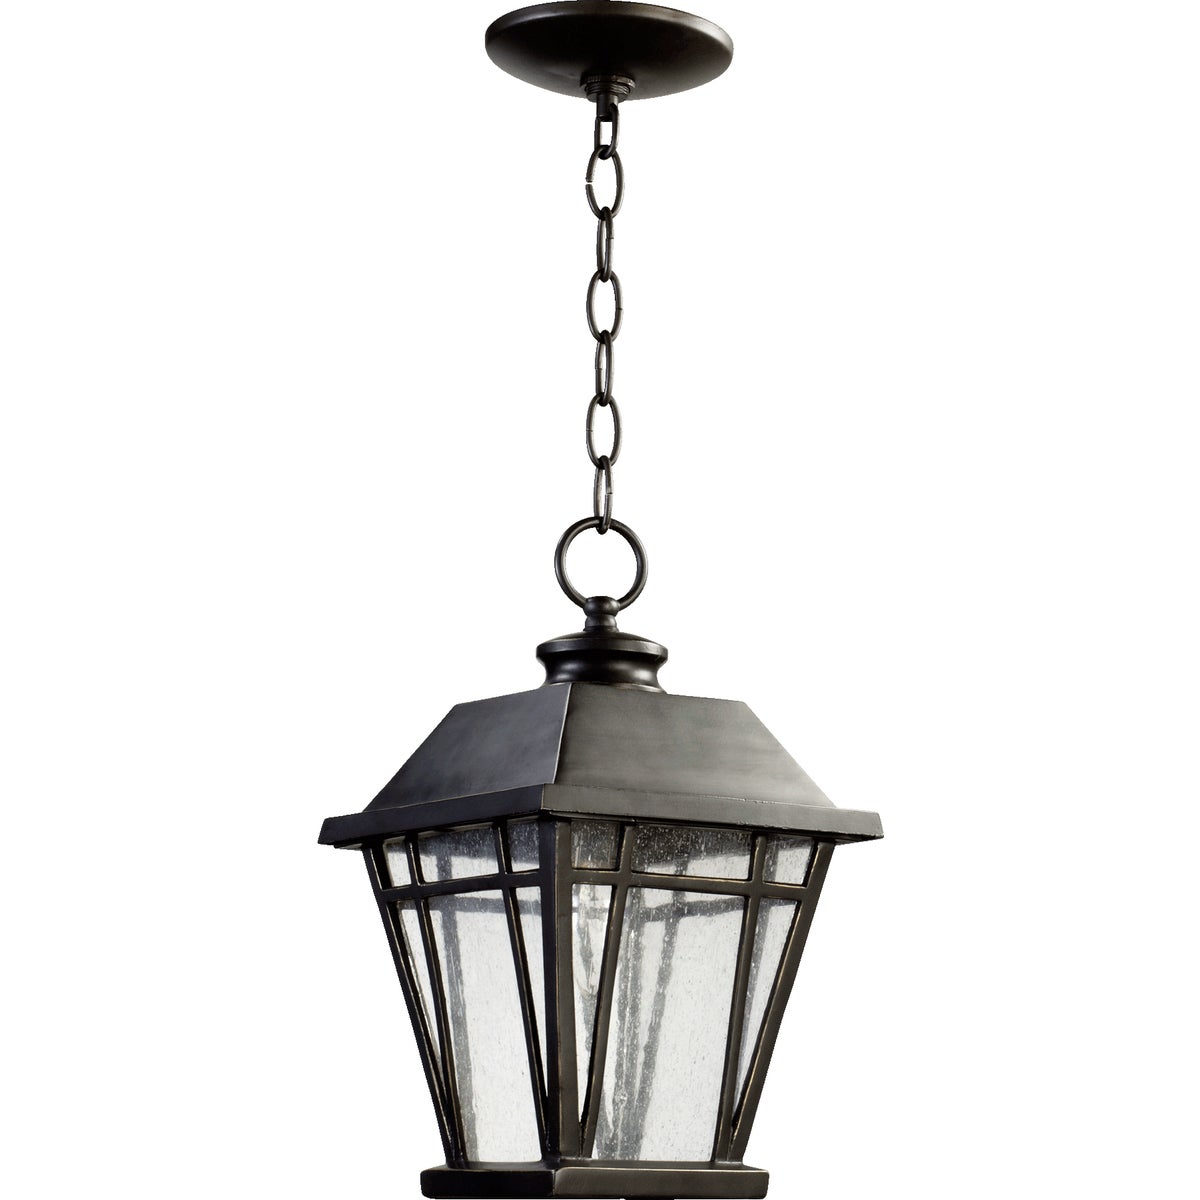 A traditional outdoor hanging light with a black fixture and clear glass panes, adding rustic charm to your outdoor space.